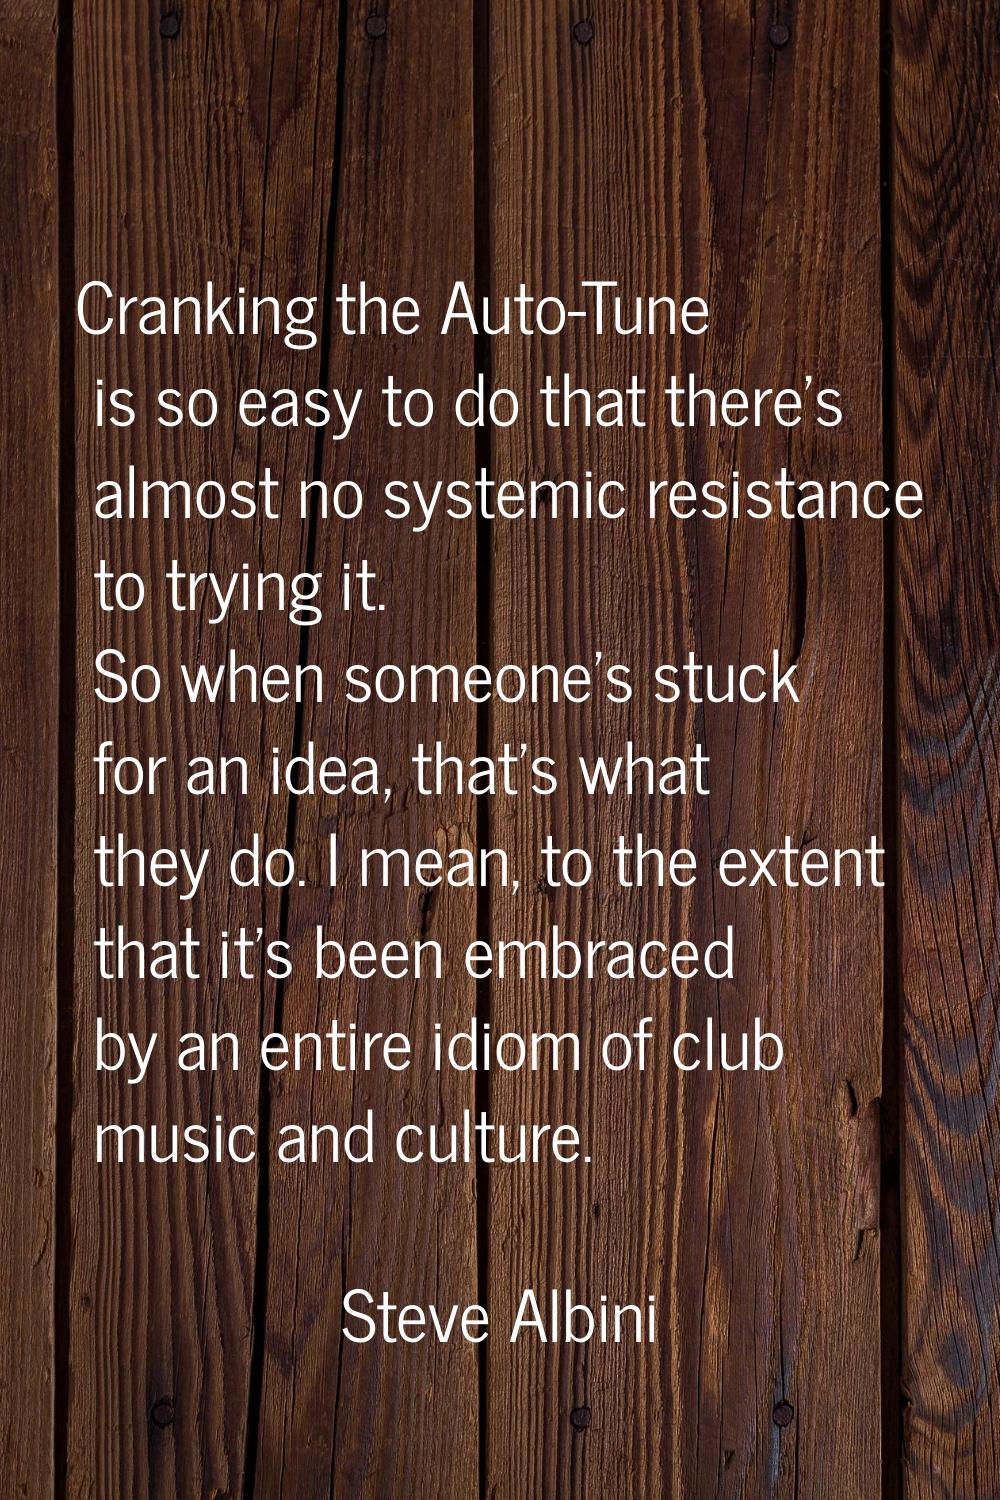 Cranking the Auto-Tune is so easy to do that there's almost no systemic resistance to trying it. So